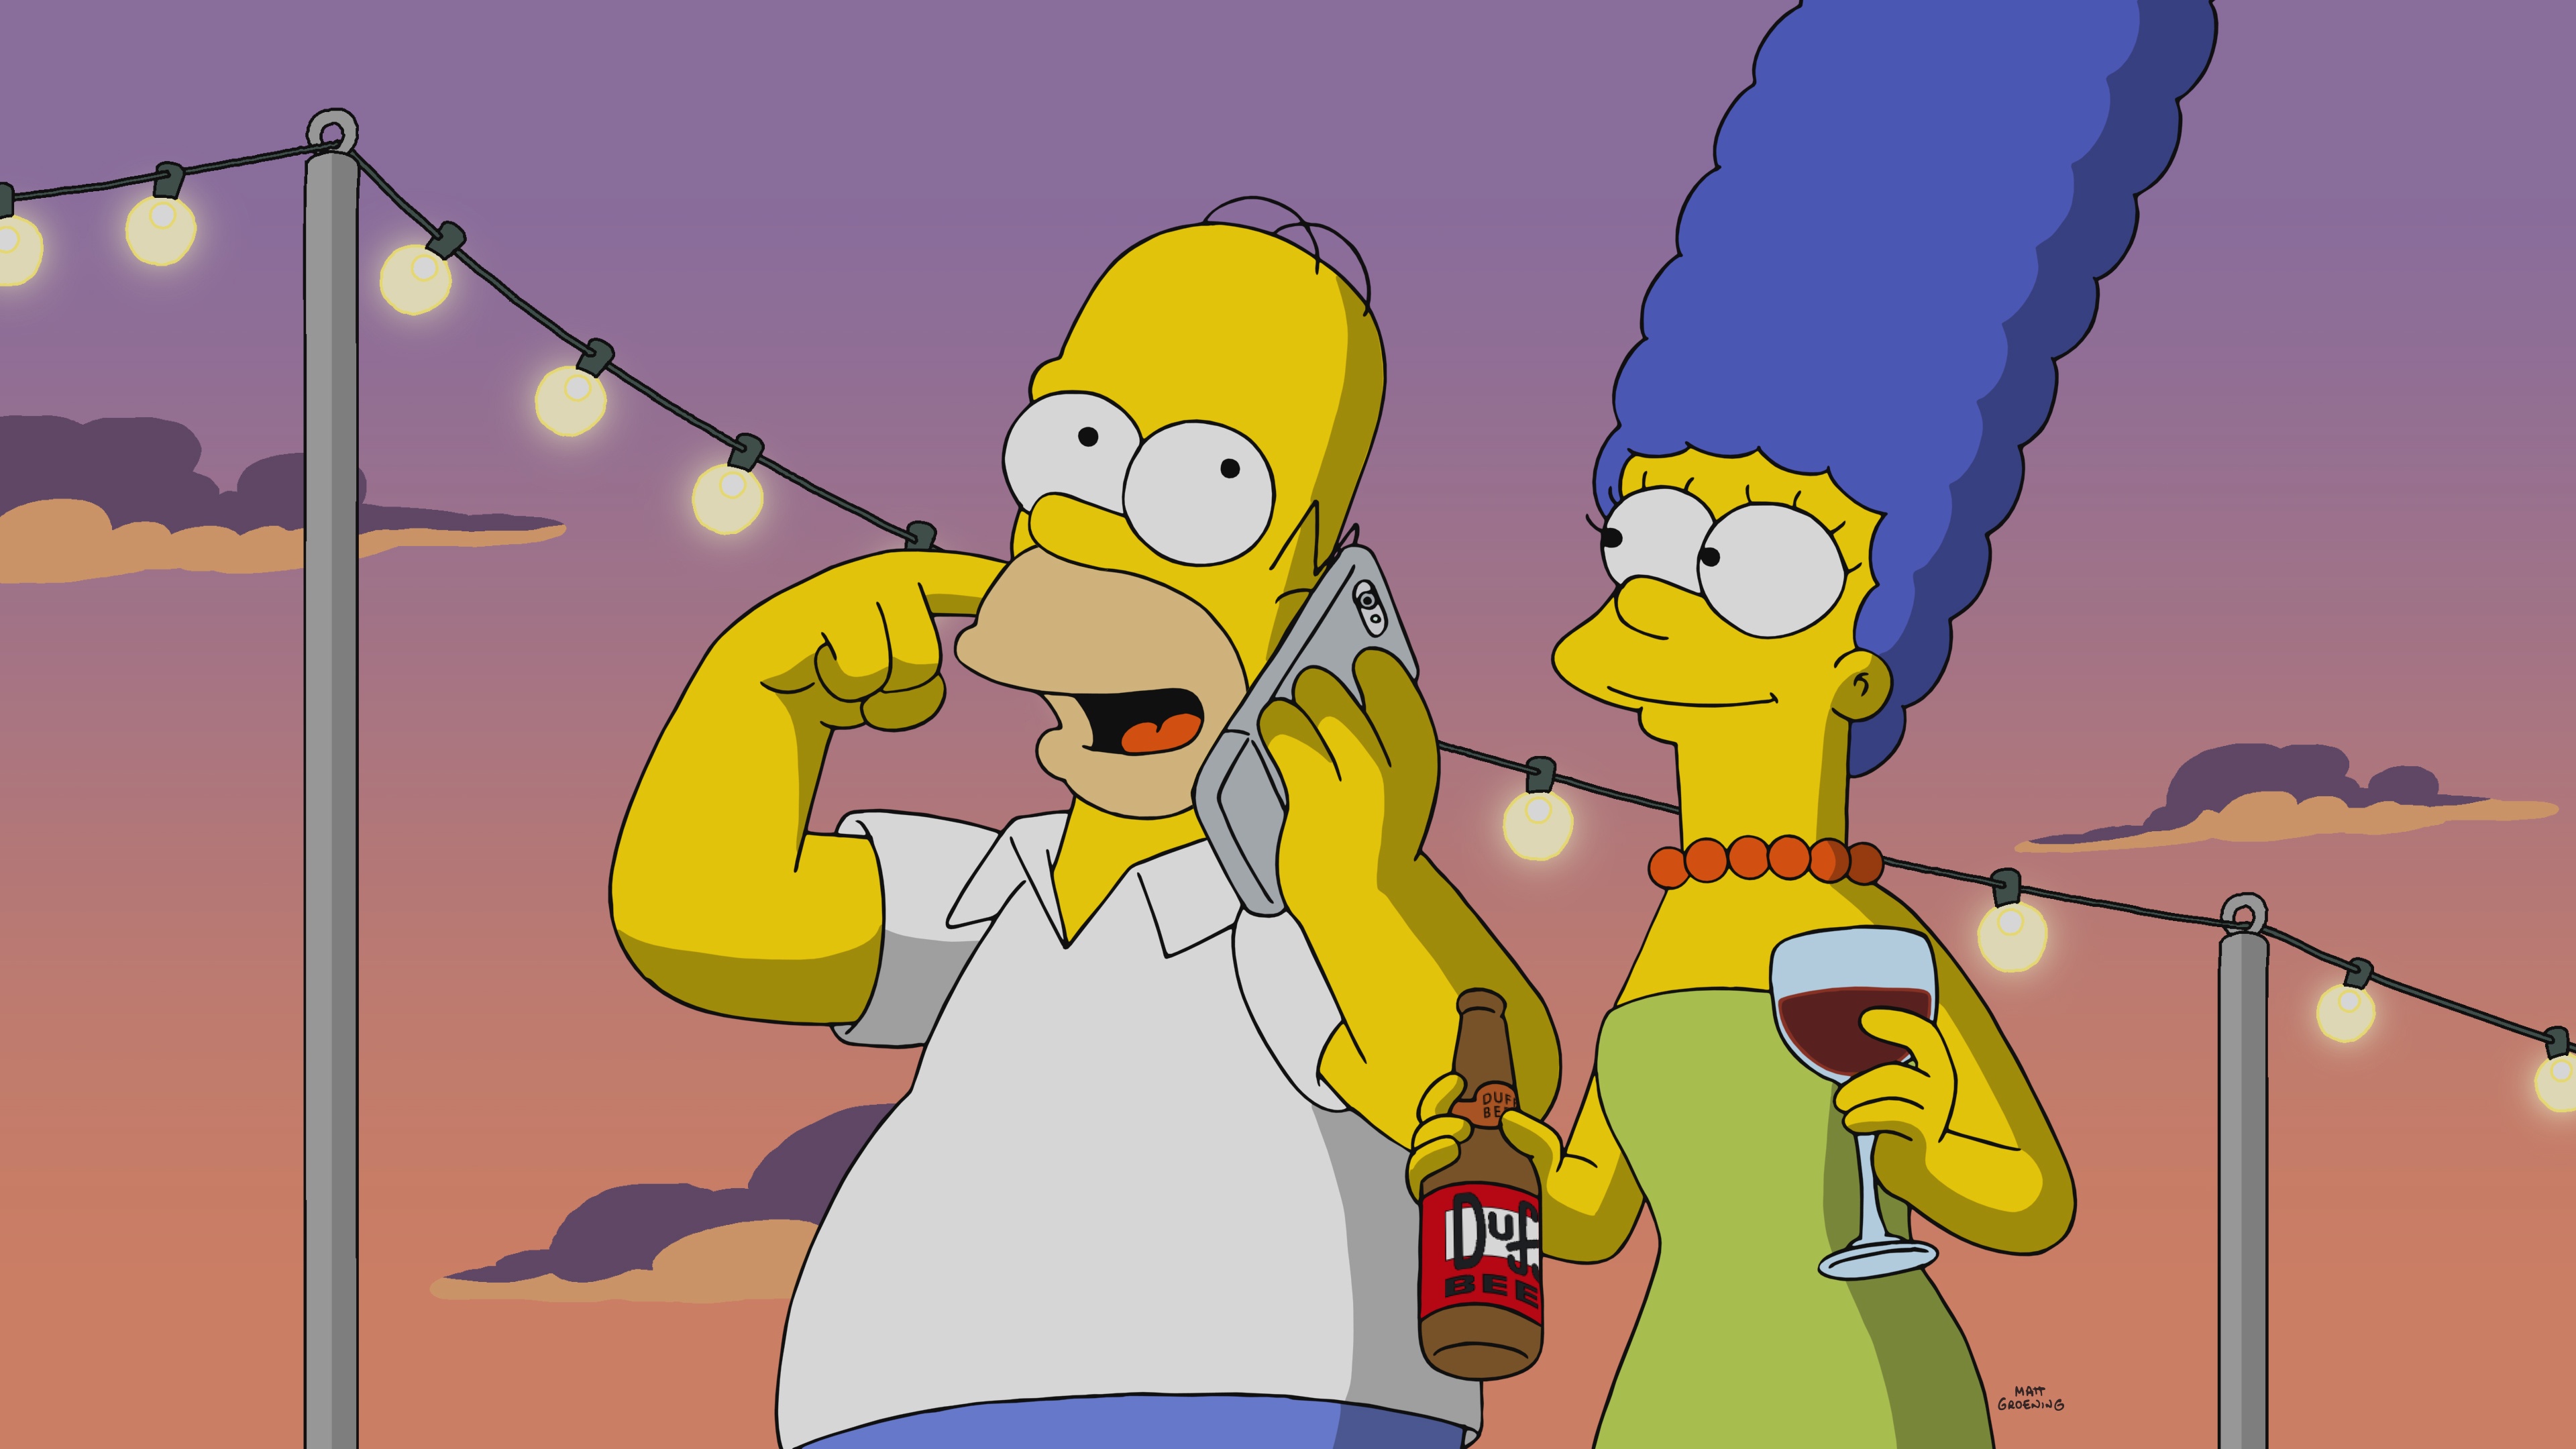 The Simpsons Season 31 is Now Streaming on Disney+